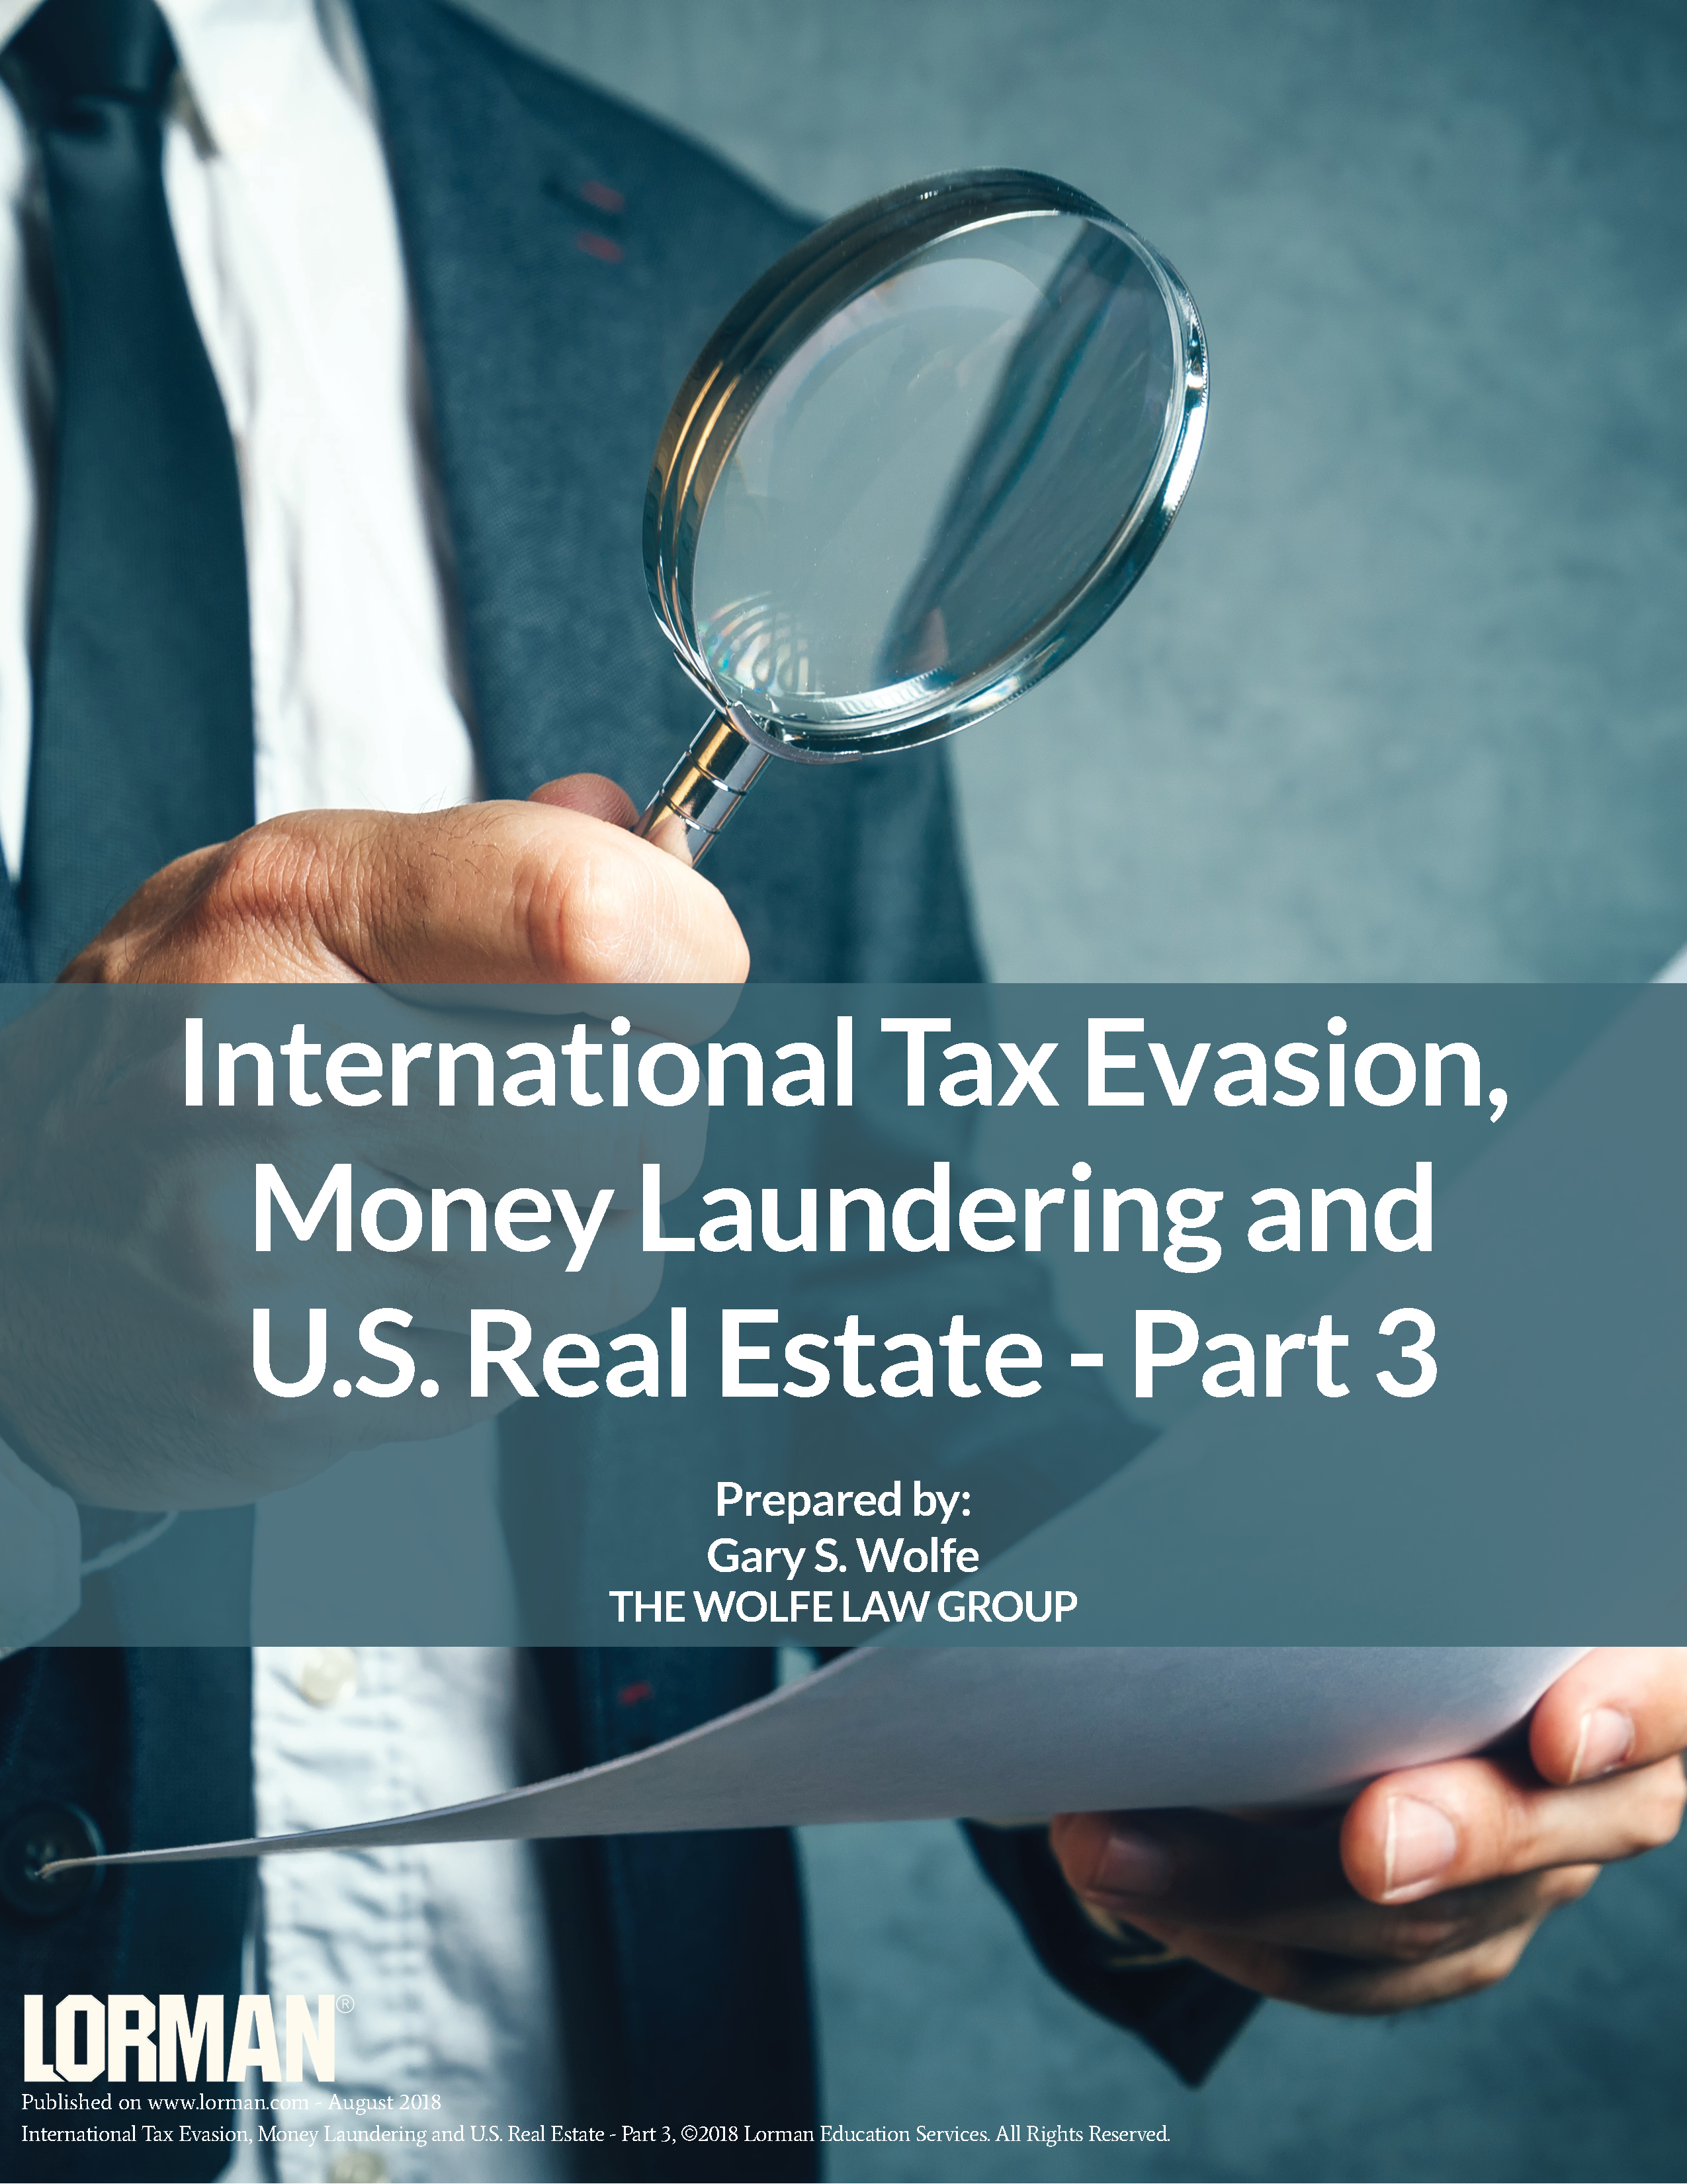 International Tax Evasion, Money Laundering and U.S. Real Estate - Part 3